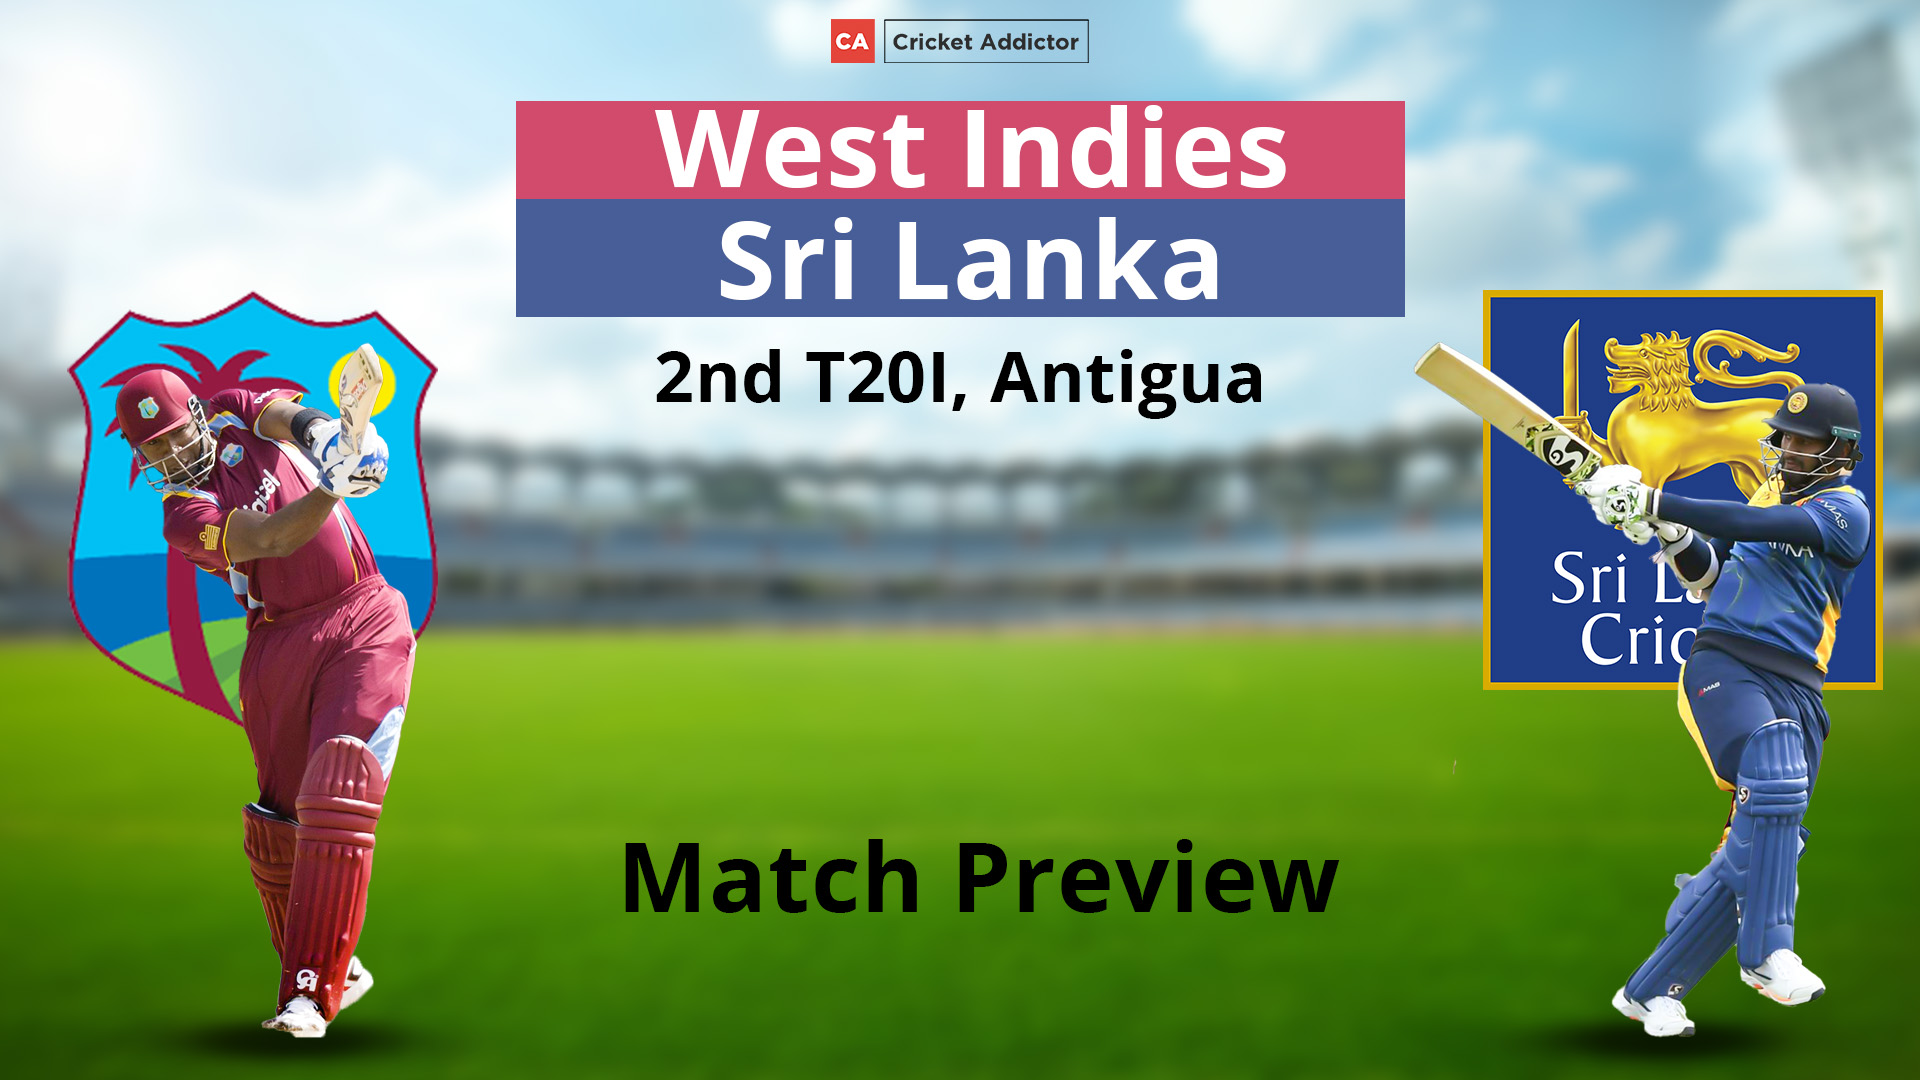 West Indies vs Sri Lanka 2021, 2nd T20I: Match Preview And Prediction